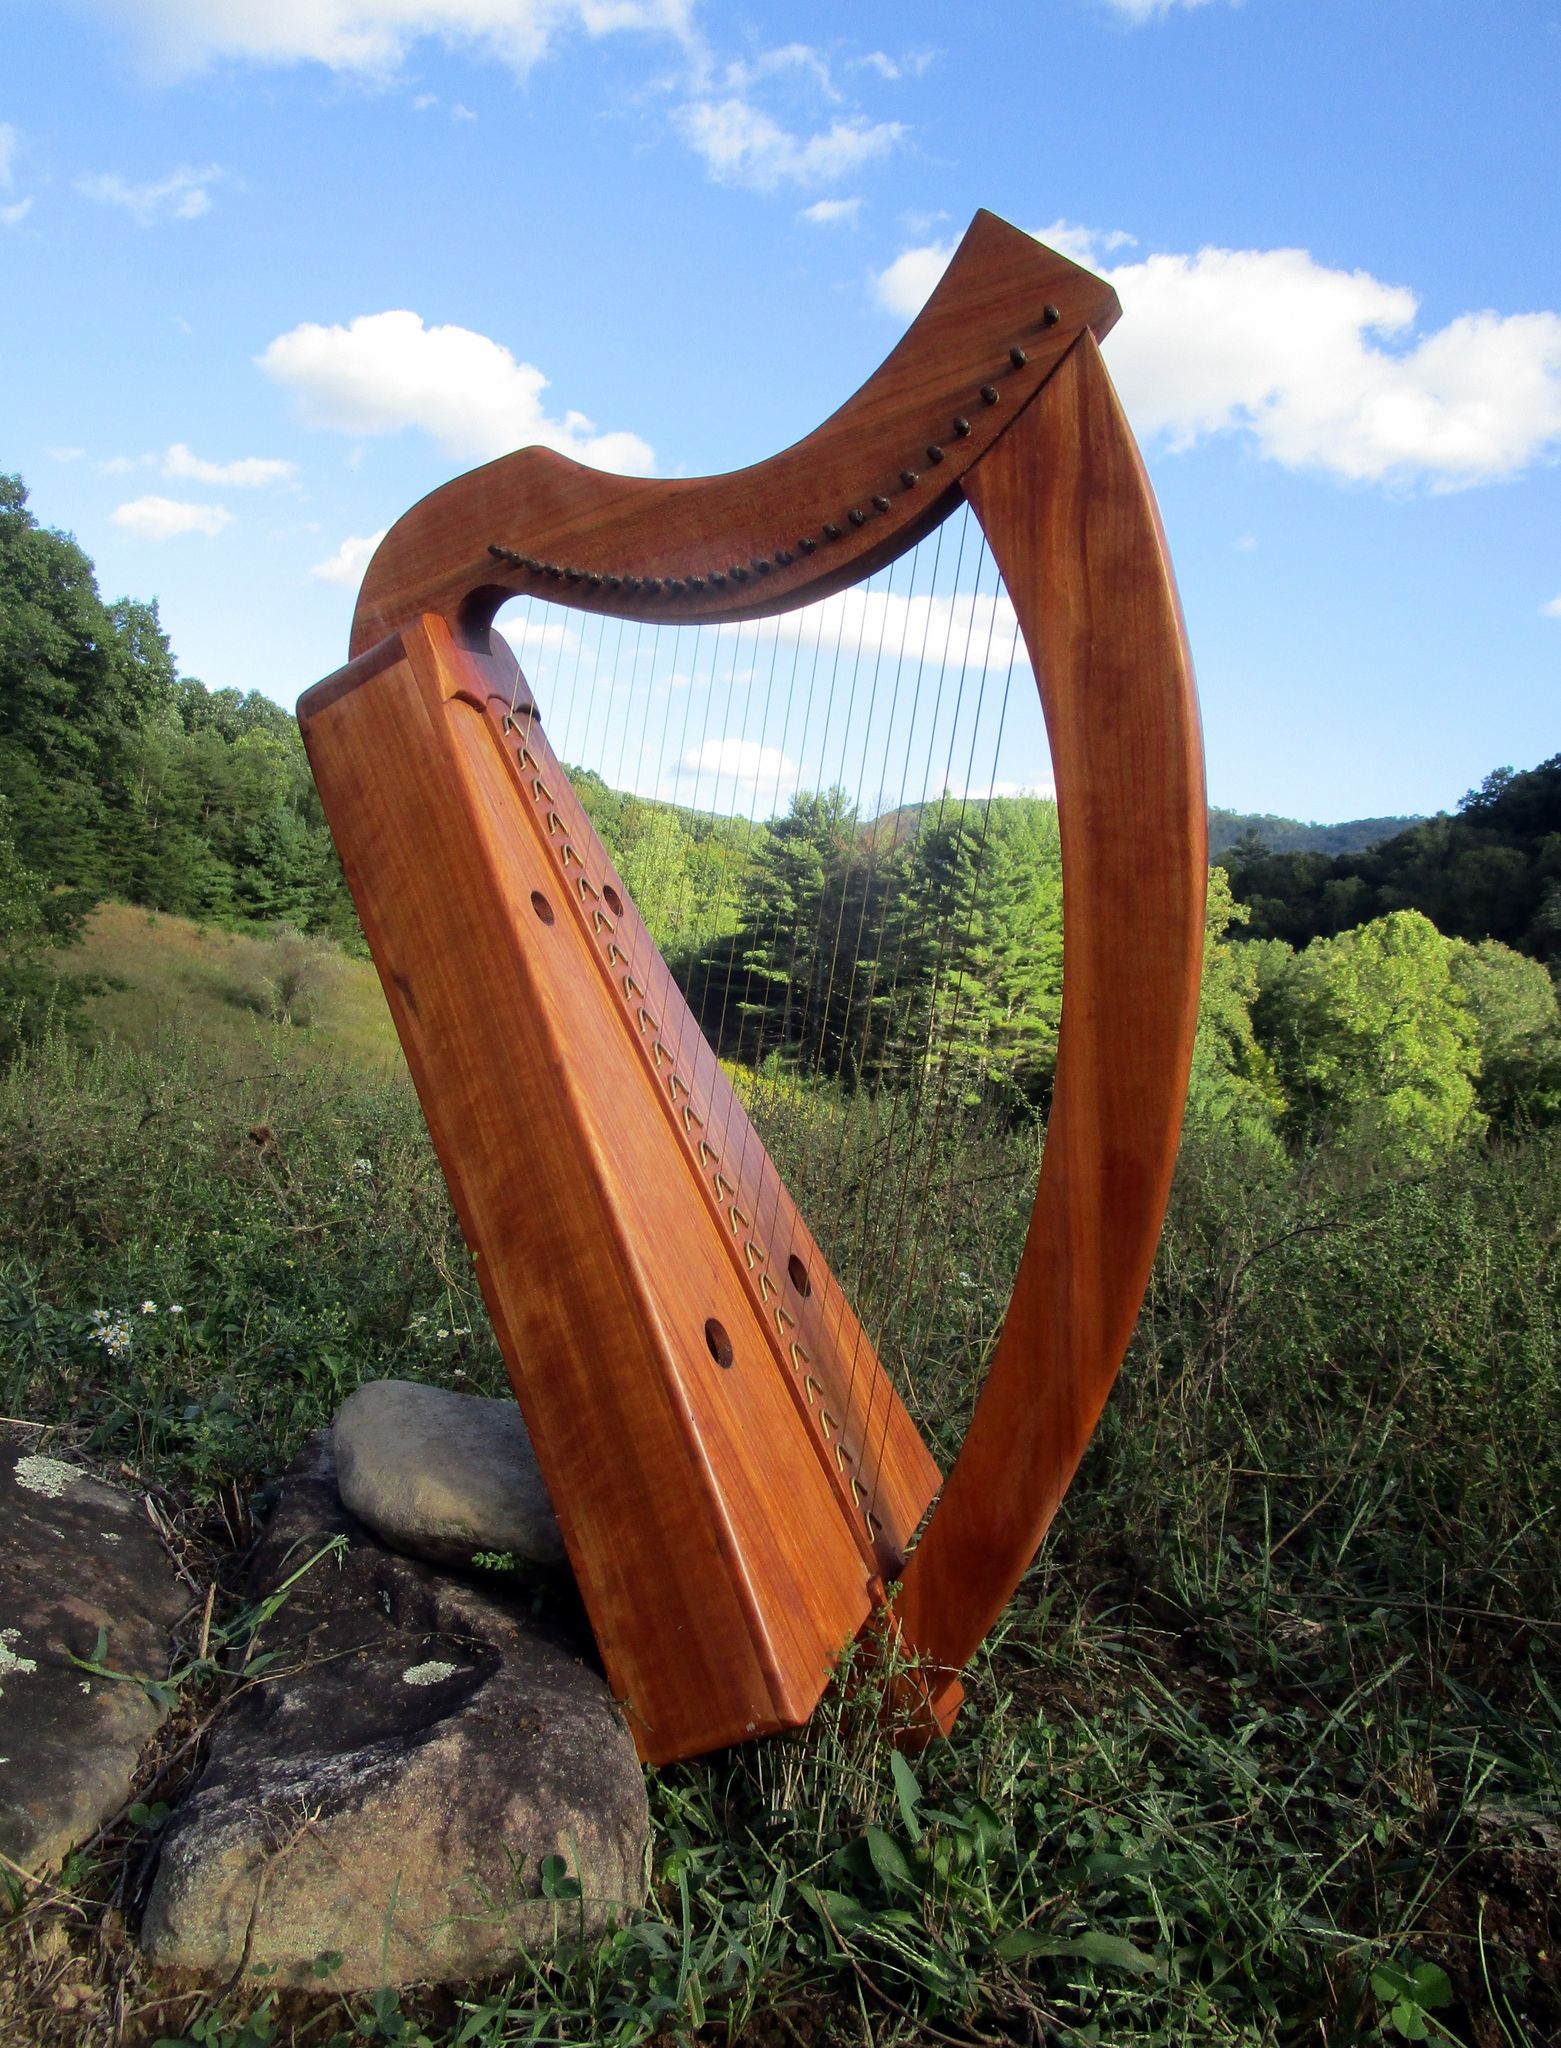 A demo of the latest harp